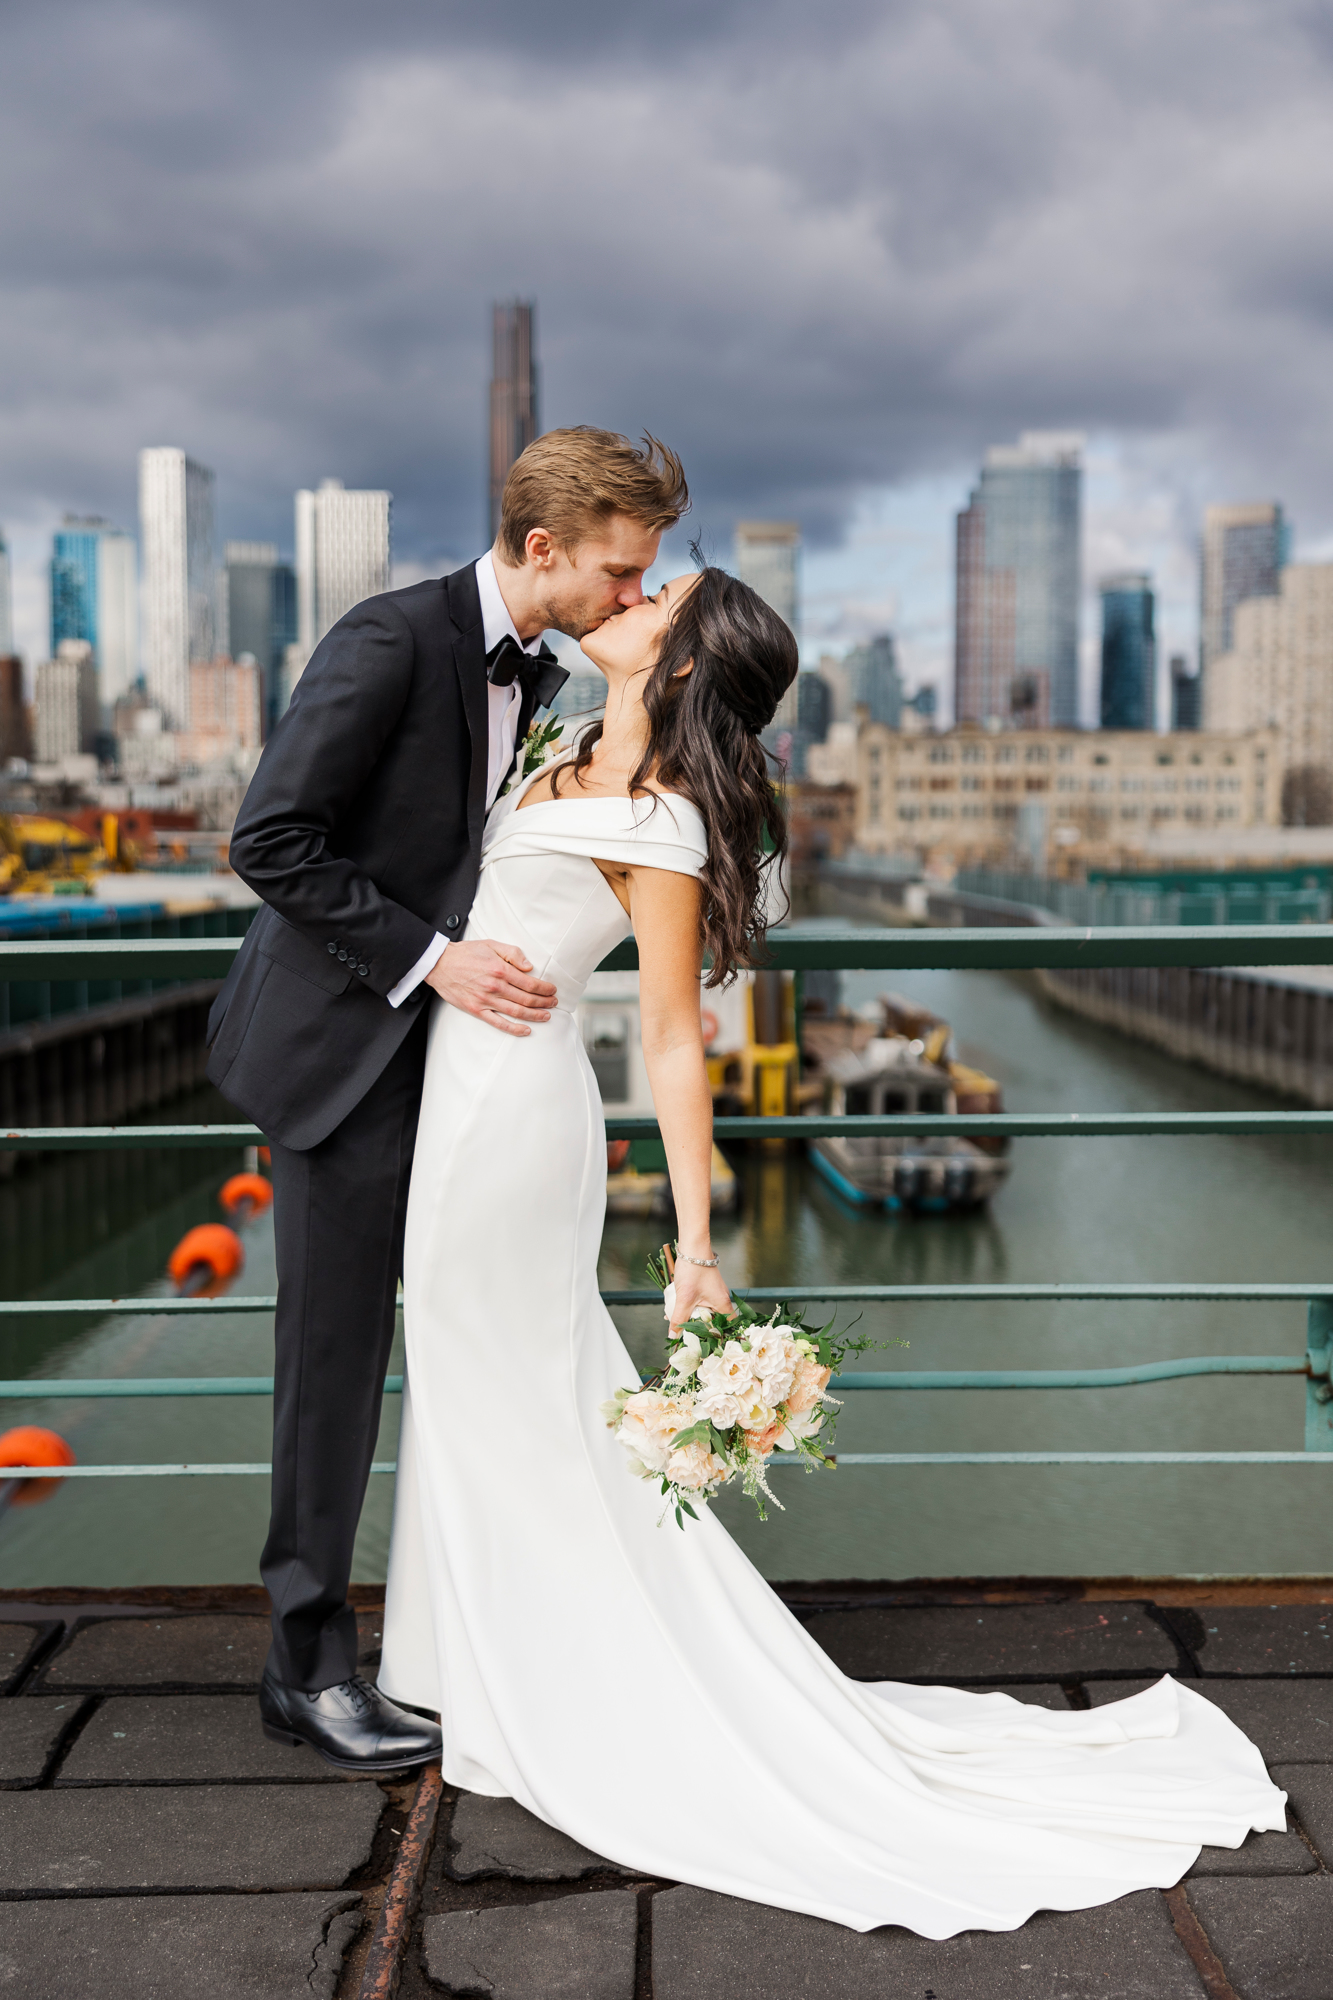 Dazzling Wedding at 501 Union in NYC